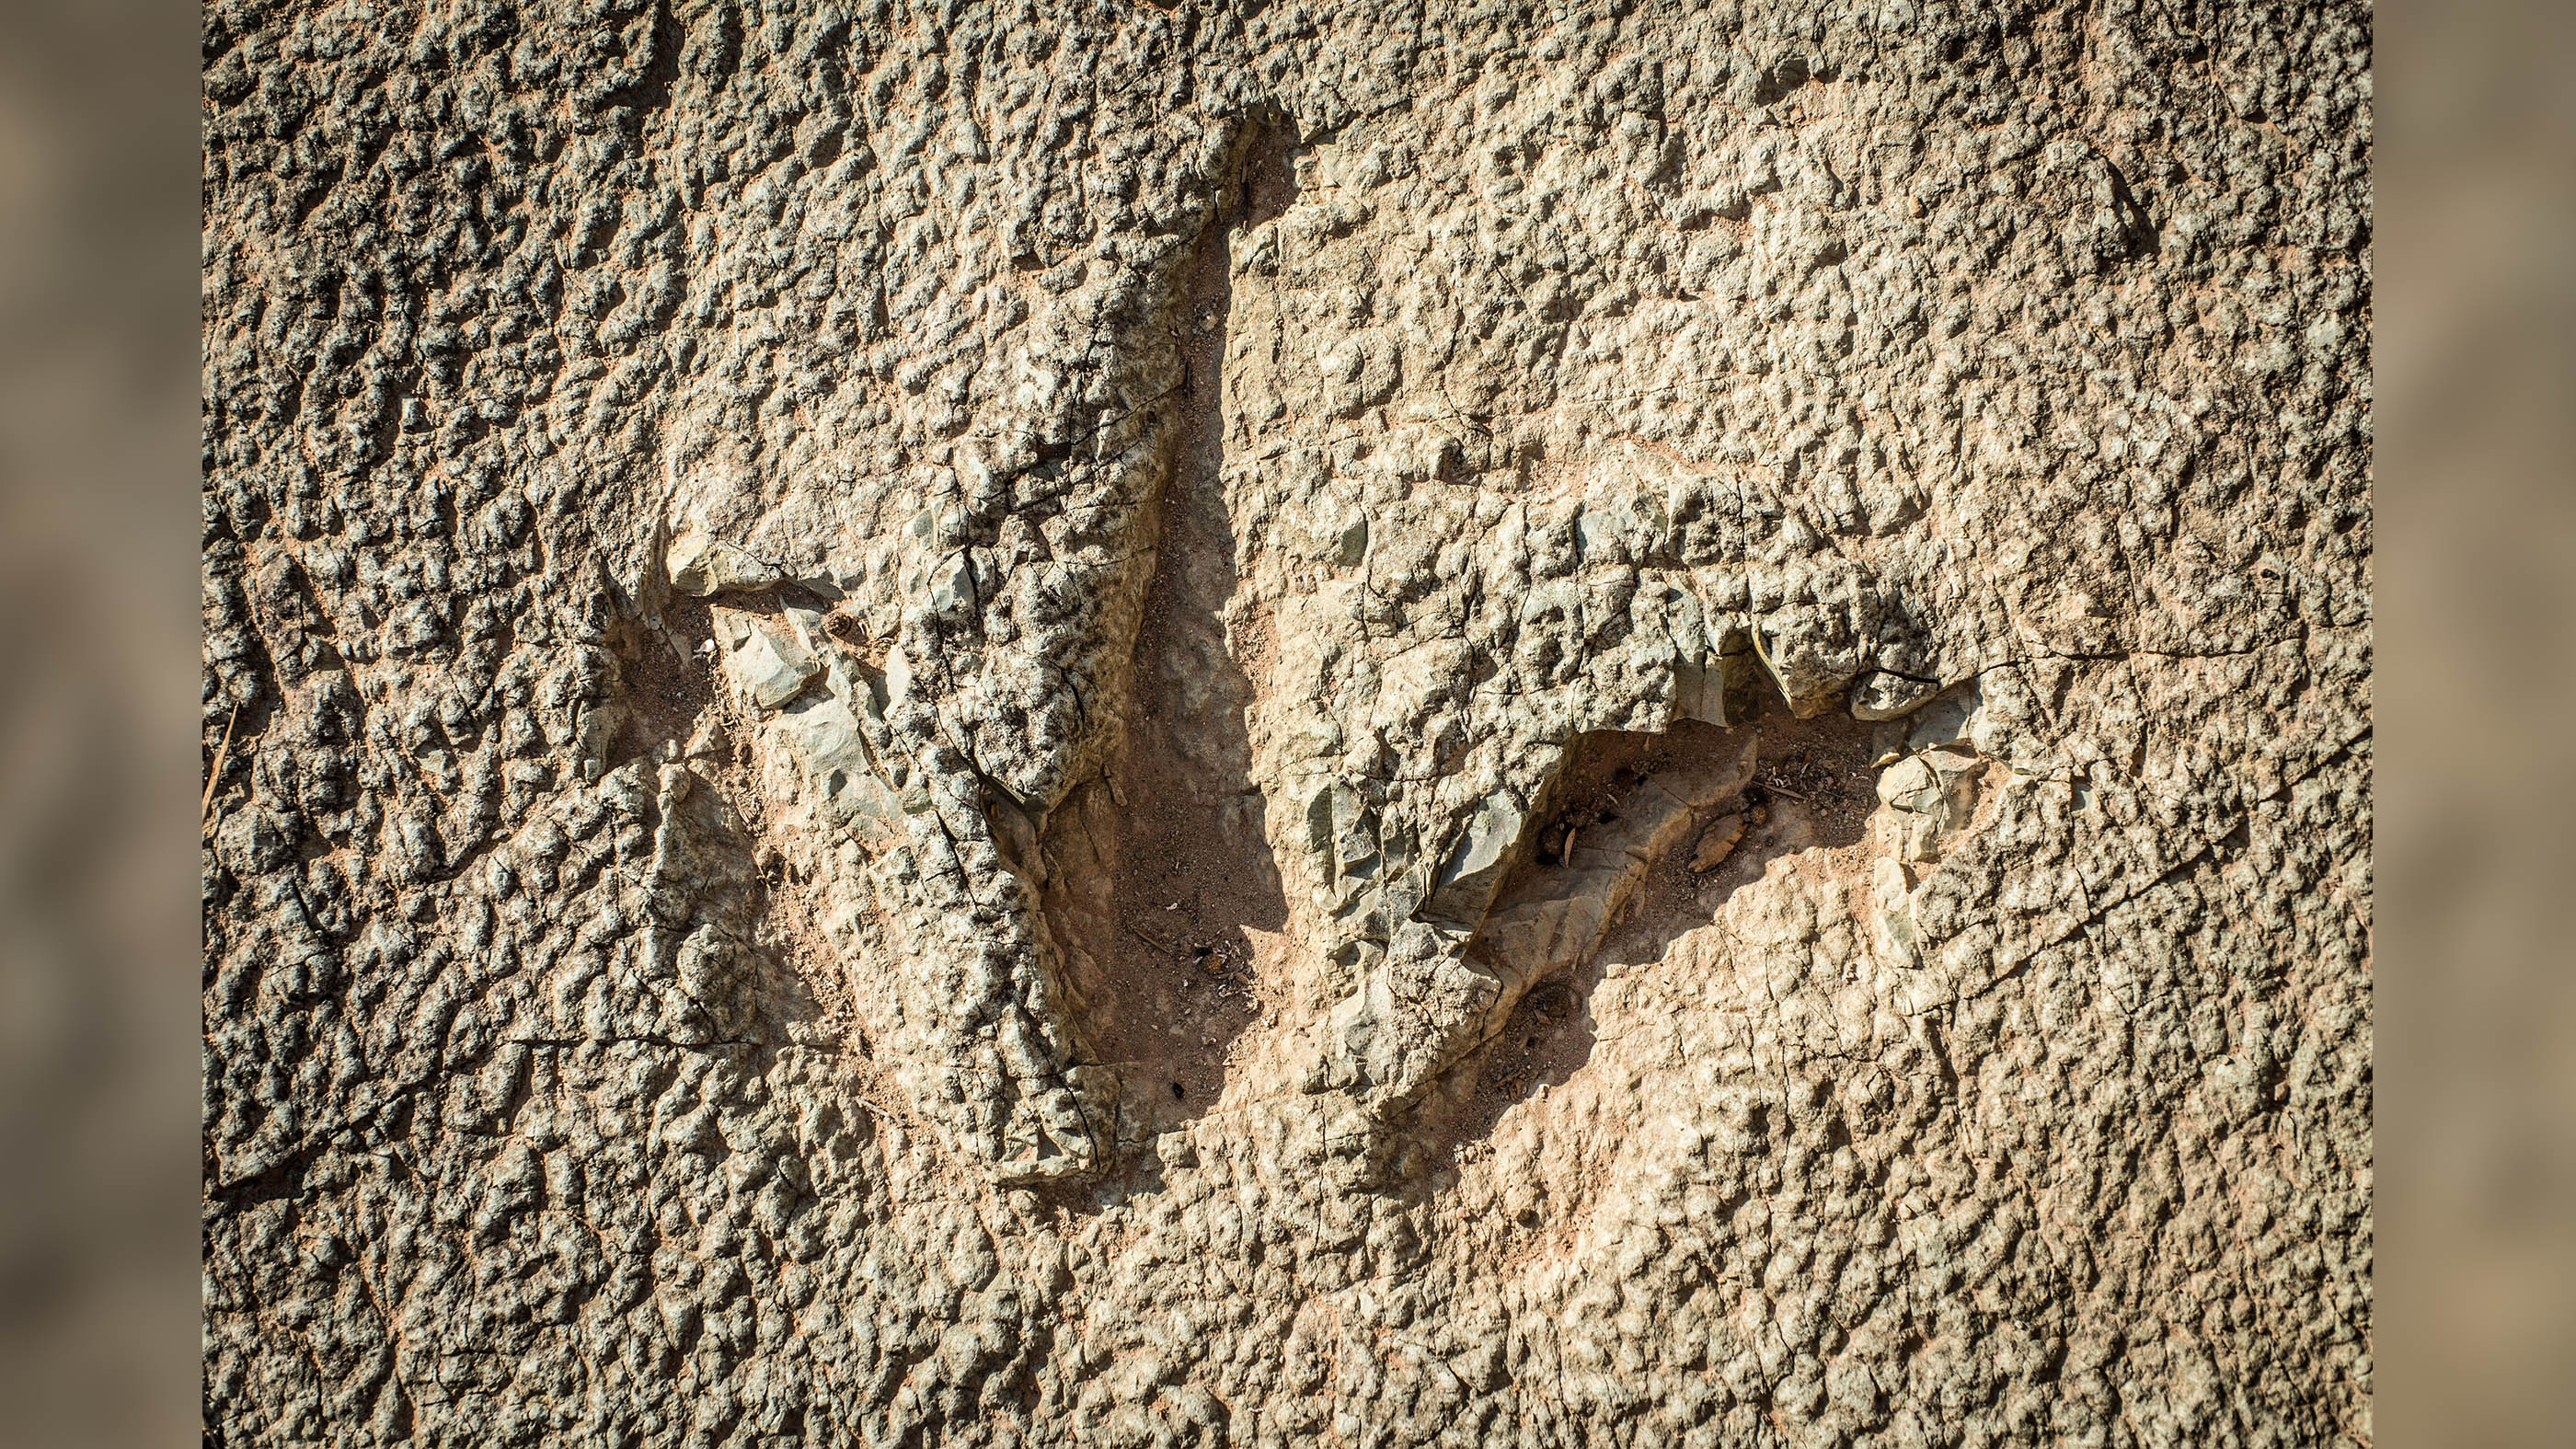 Construction may have damaged 112 million-year-old dinosaur tracks in Utah Live Science